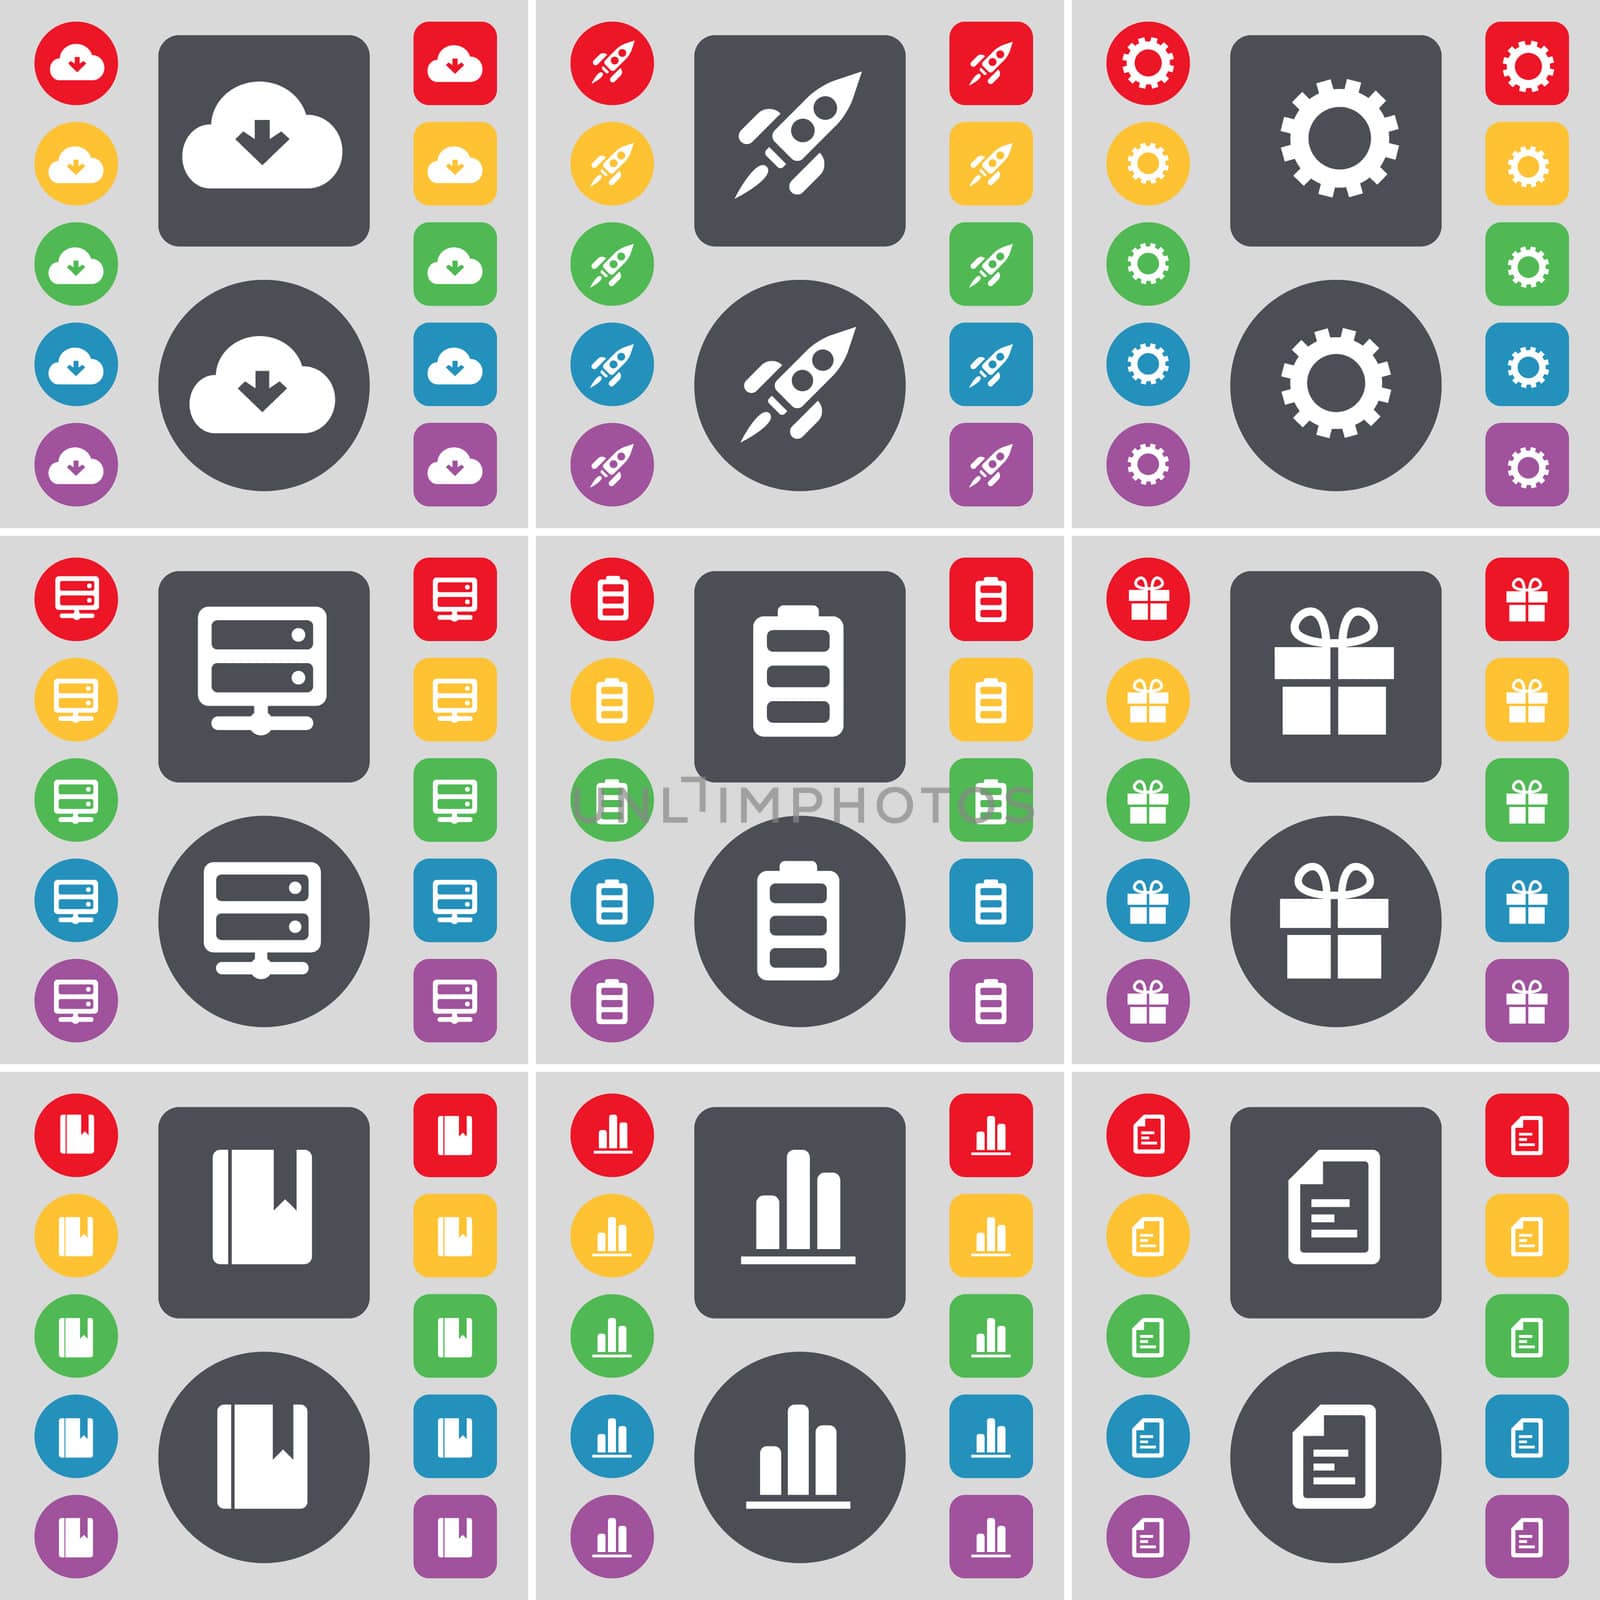 Cloud, Rocket, Gear, Server, Battery, Gift, Dictionary, Diagram, Text file icon symbol. A large set of flat, colored buttons for your design. illustration